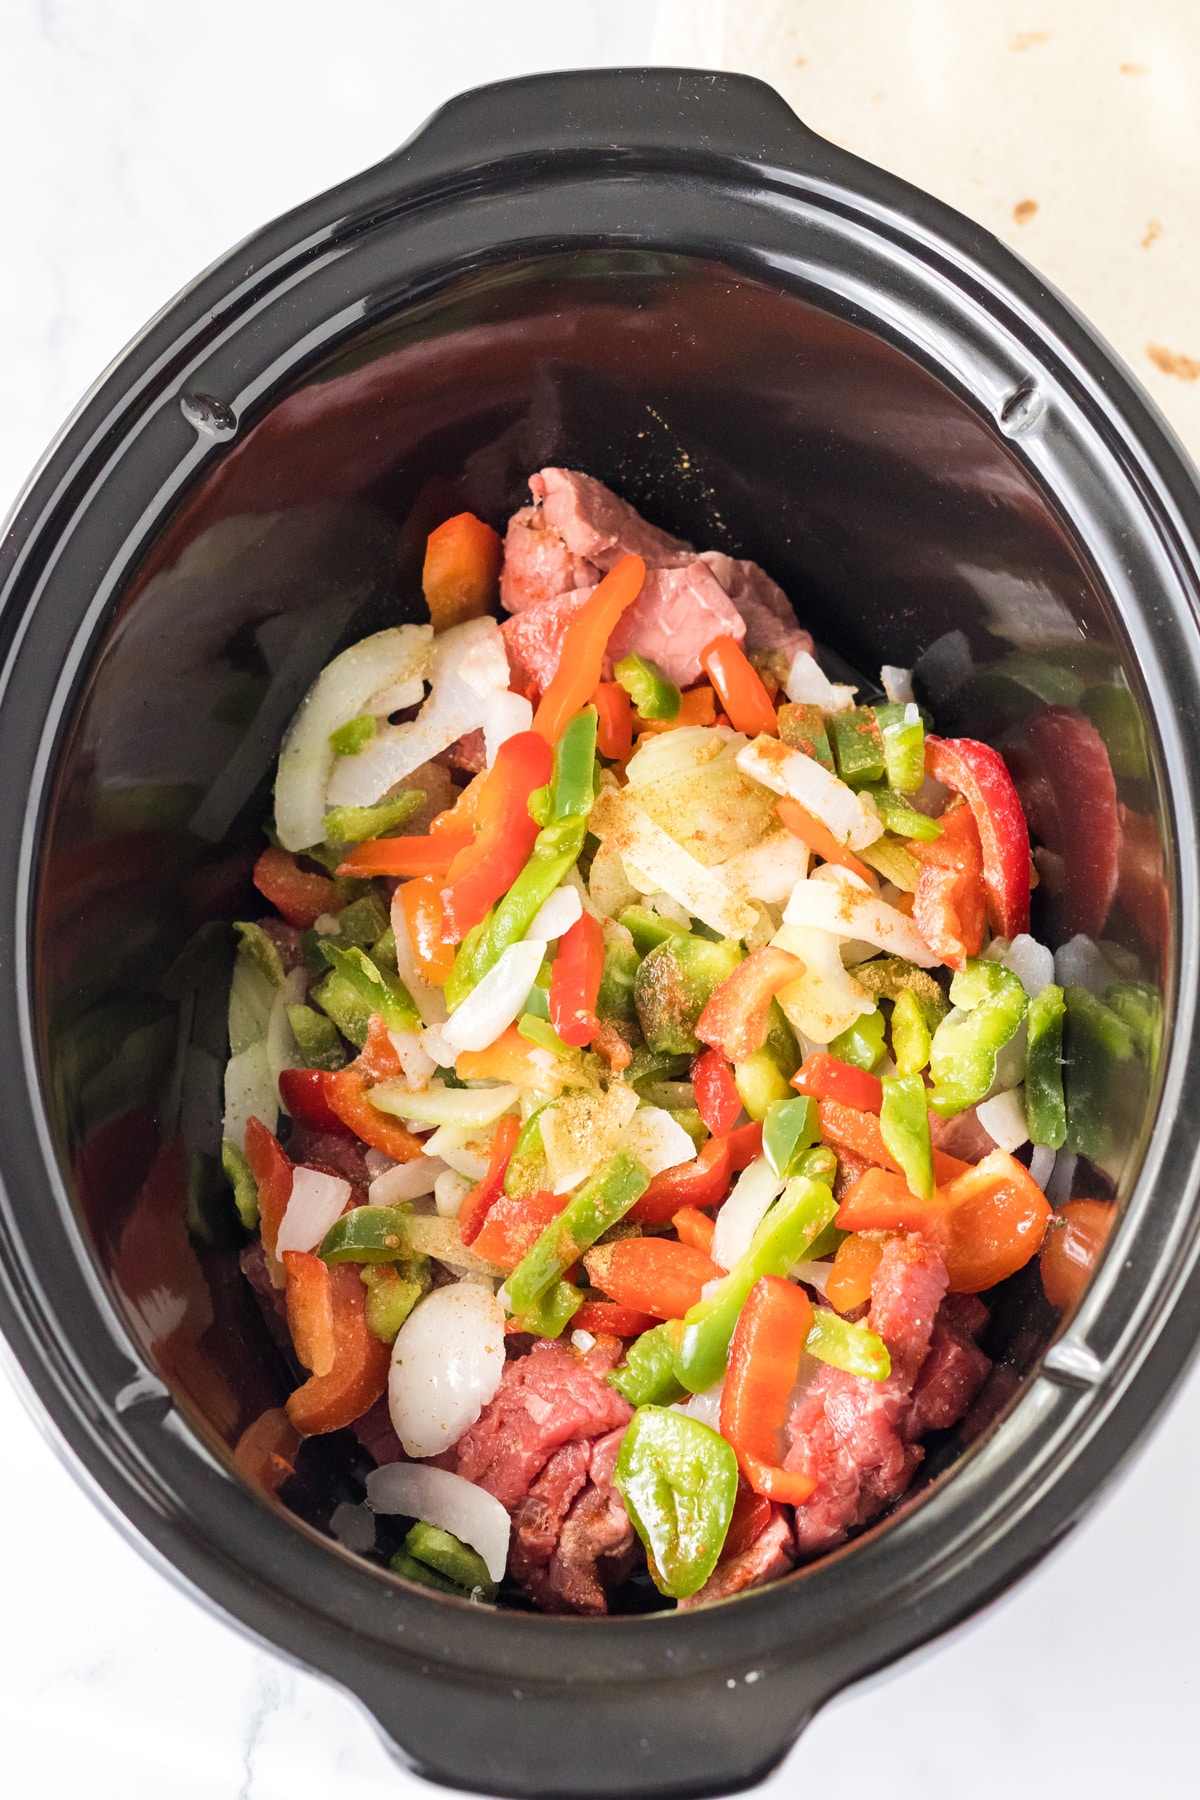 Mixing meat and vegetables for Slow Cooker Cheesesteak Quesadillas recipe